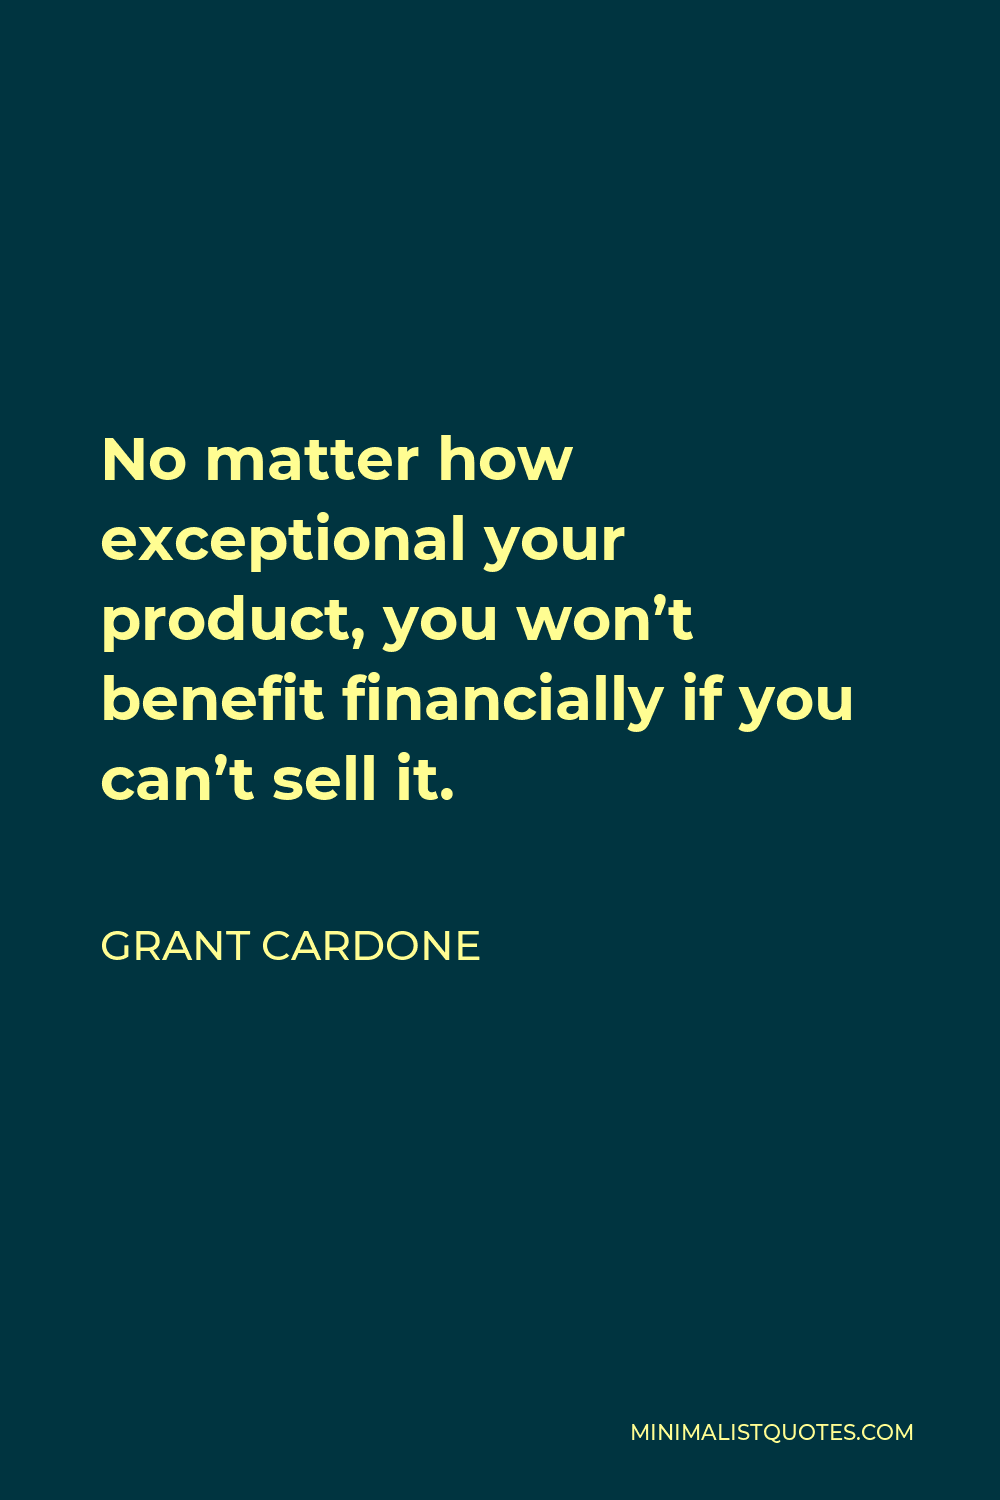 Grant Cardone Quote - No matter how exceptional your product, you won’t benefit financially if you can’t sell it.